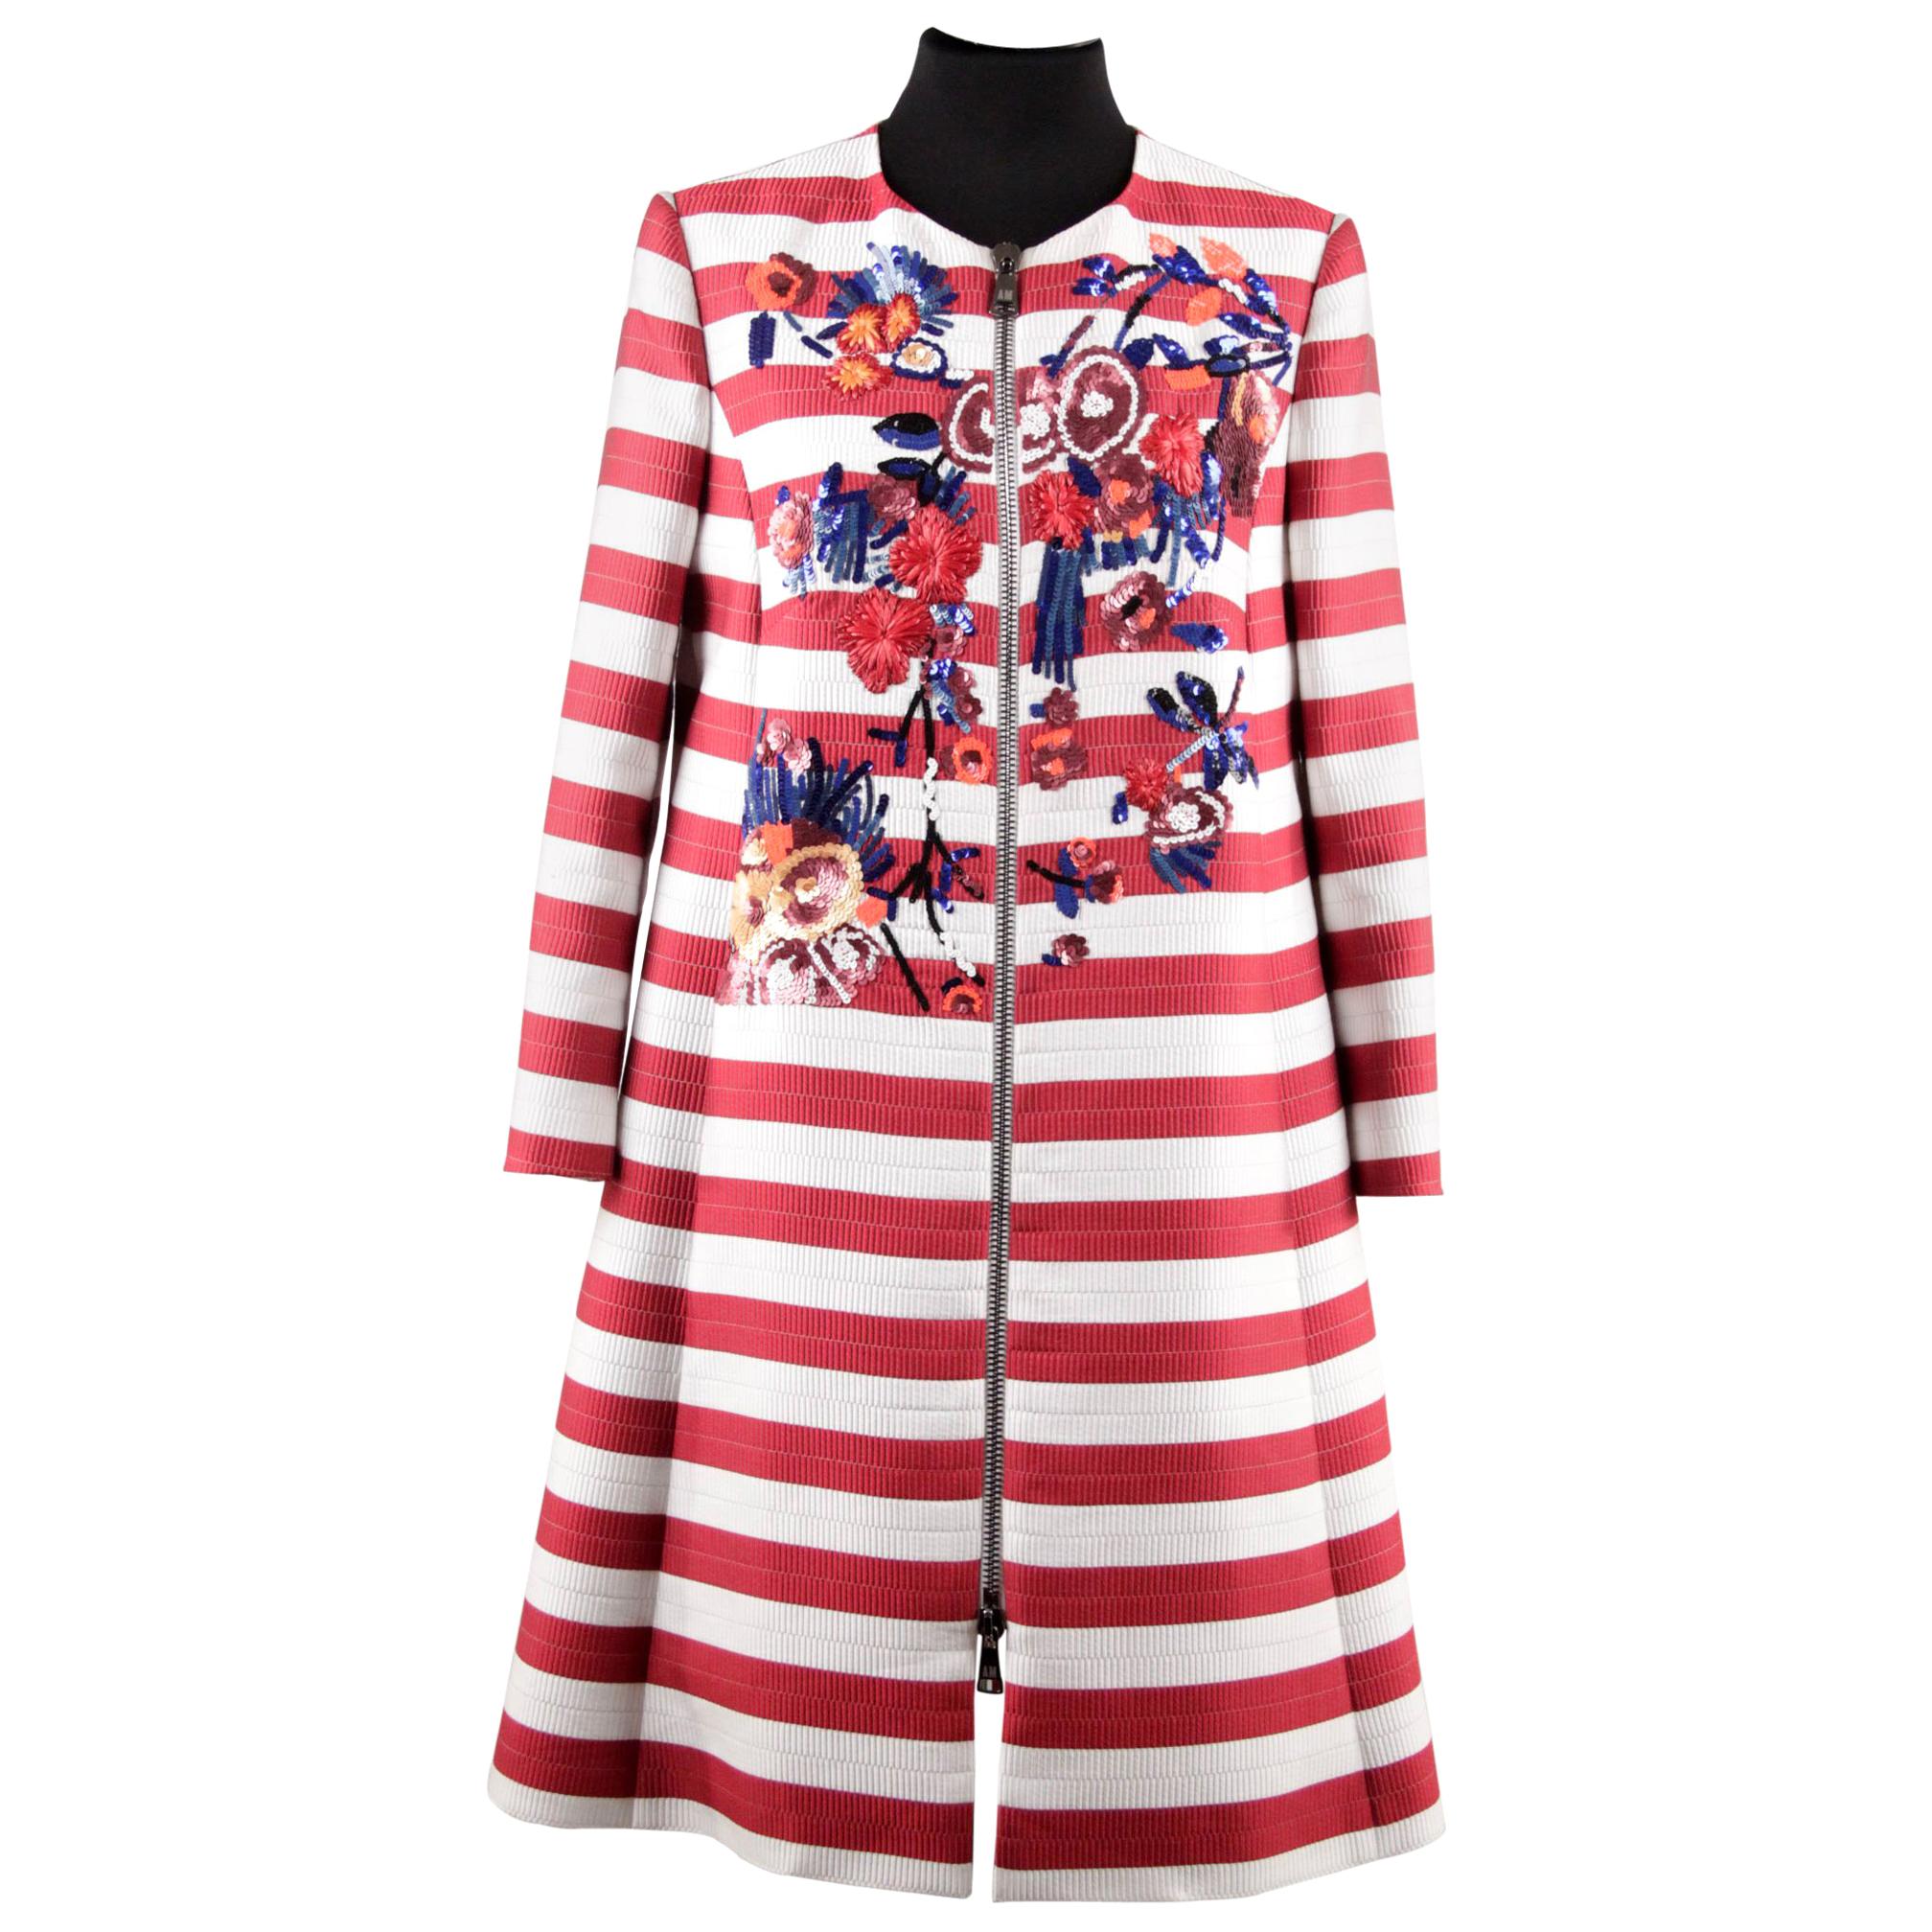 Antonio Marras Striped GrosGrain Embroidered Coat with Zip Front Size 38